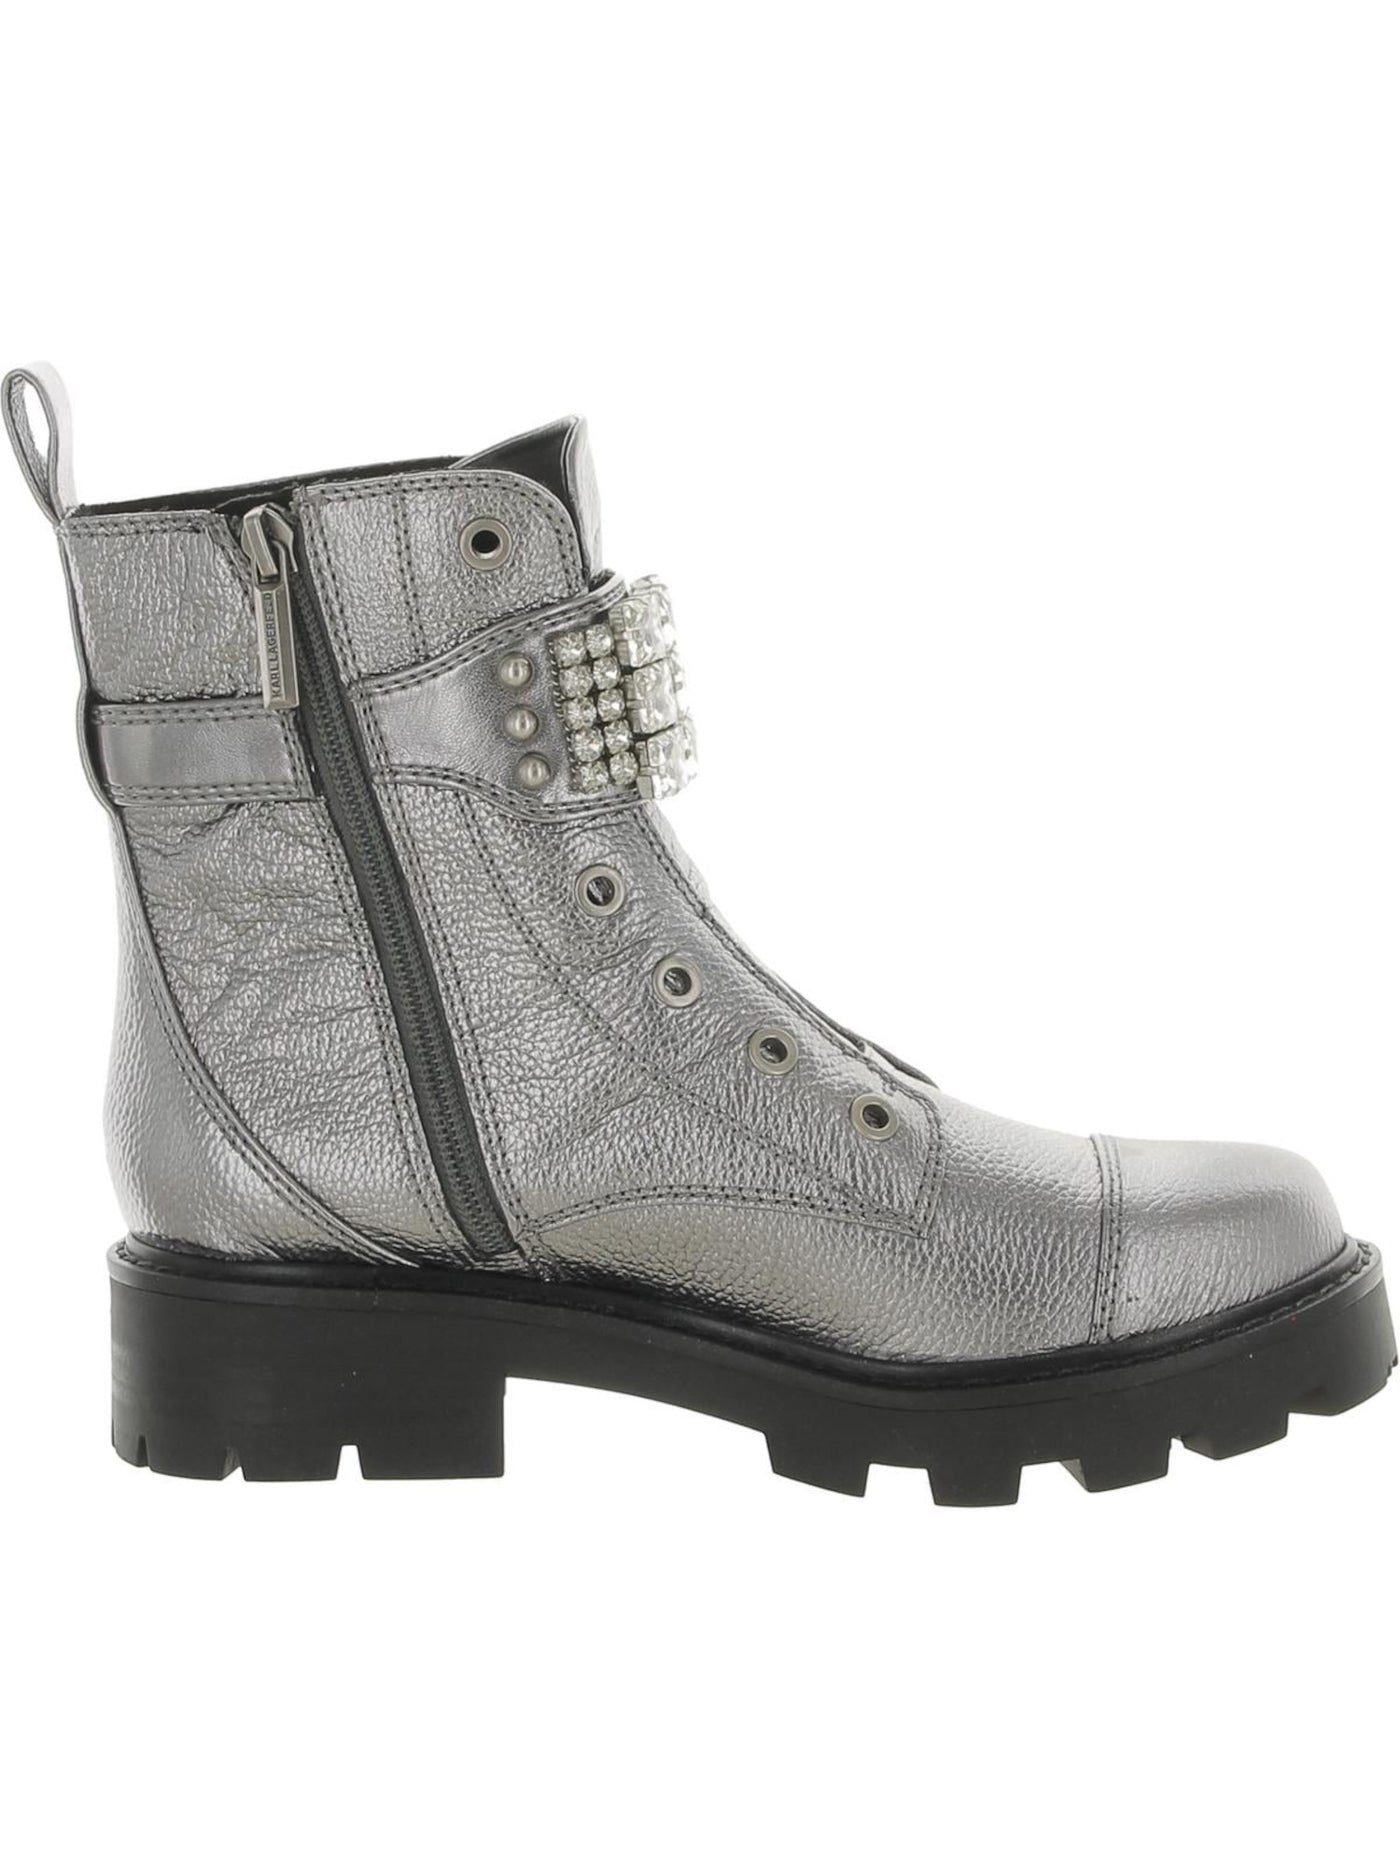 KARL LAGERFELD Womens Silver Metallic Lug Sole Padded Grommet Detail Pull Tab Buckle Accent Embellished Maeva Round Toe Block Heel Zip-Up Leather Combat Boots 11